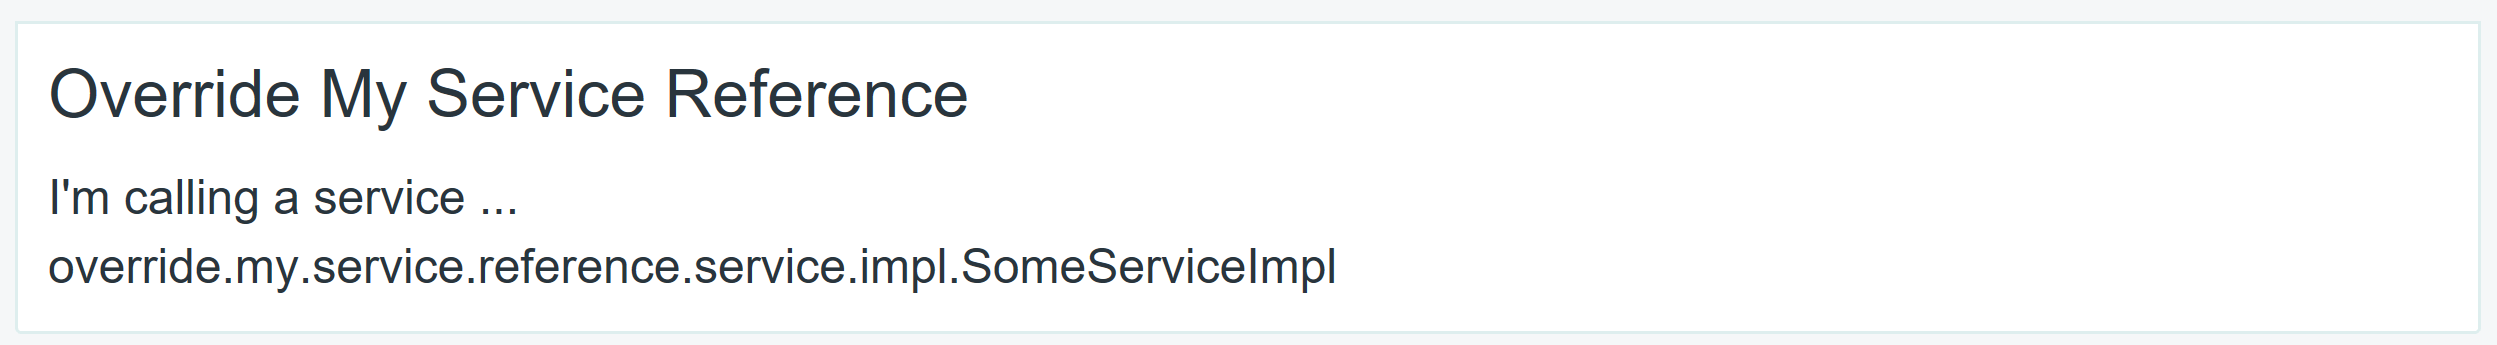 Figure 1: Prior to overriding the service reference in example portlet module override-my-service-reference, the portlets message indicates its calling the default service implementation override.my.service.reference.service.impl.SomeServiceImpl